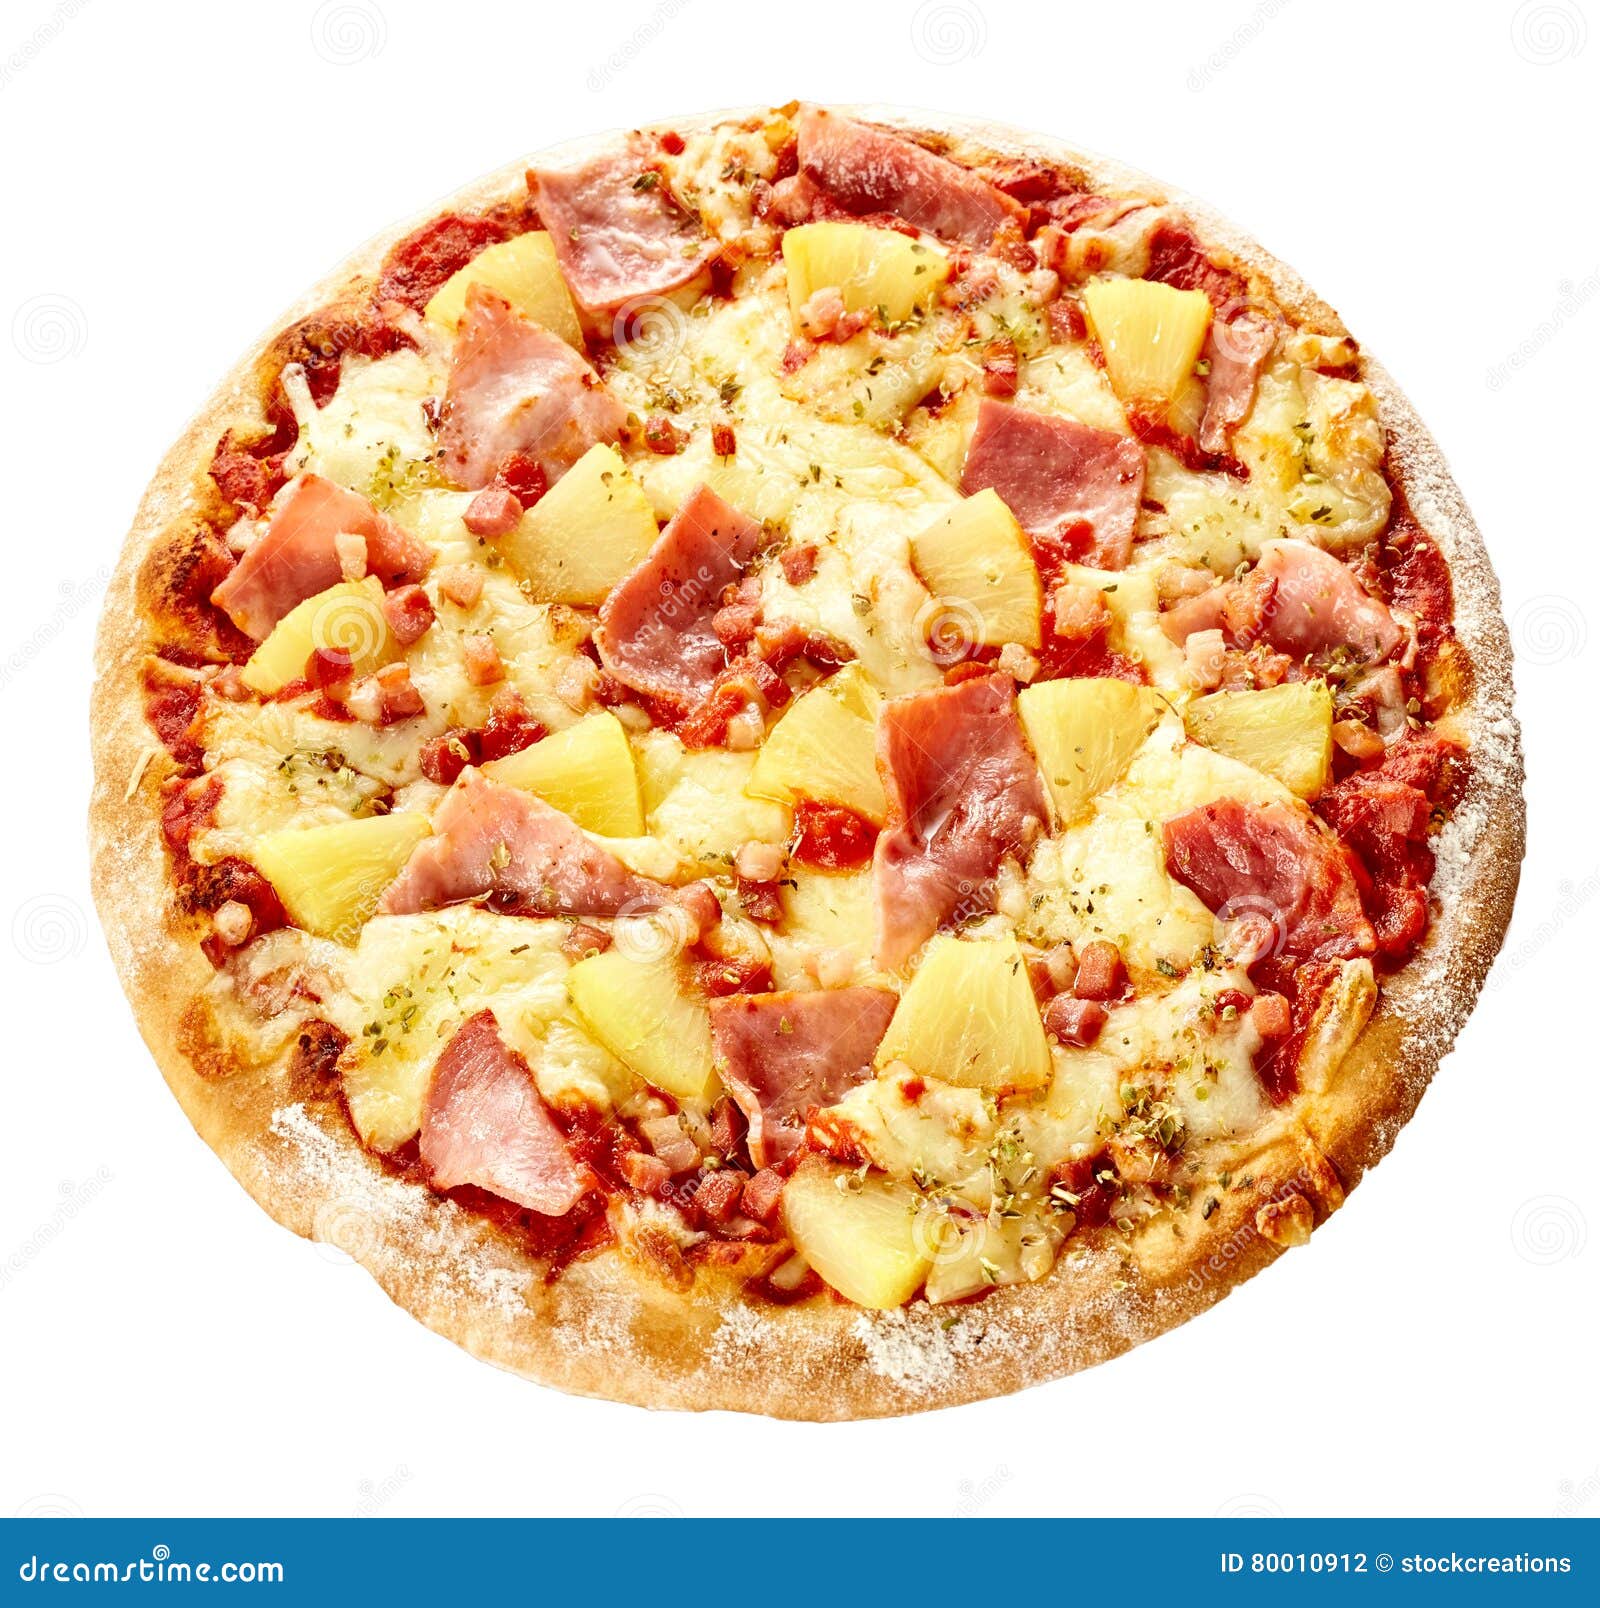 Oven-baked delicious Italian Hawaiian pizza with tropical pineapple and ham topping on mozzarella cheese isolated on white